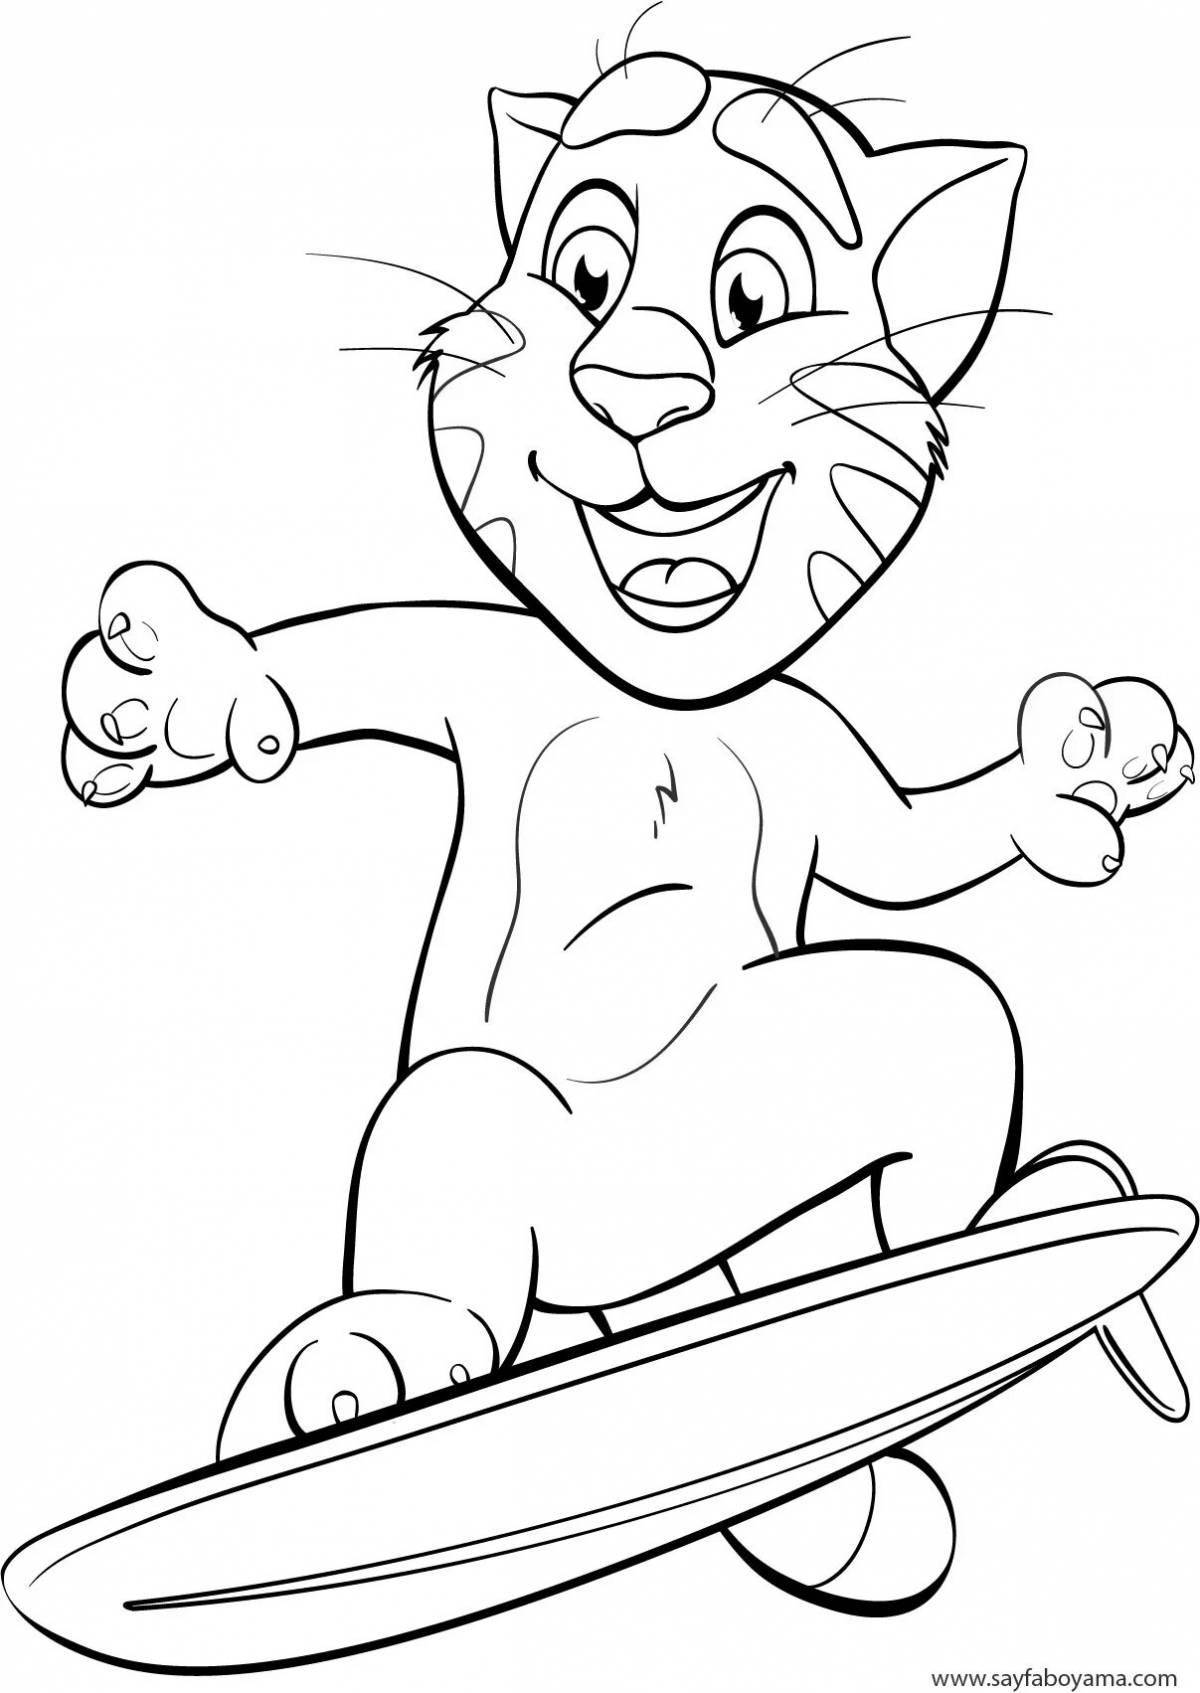 Playful tom and ben coloring pages